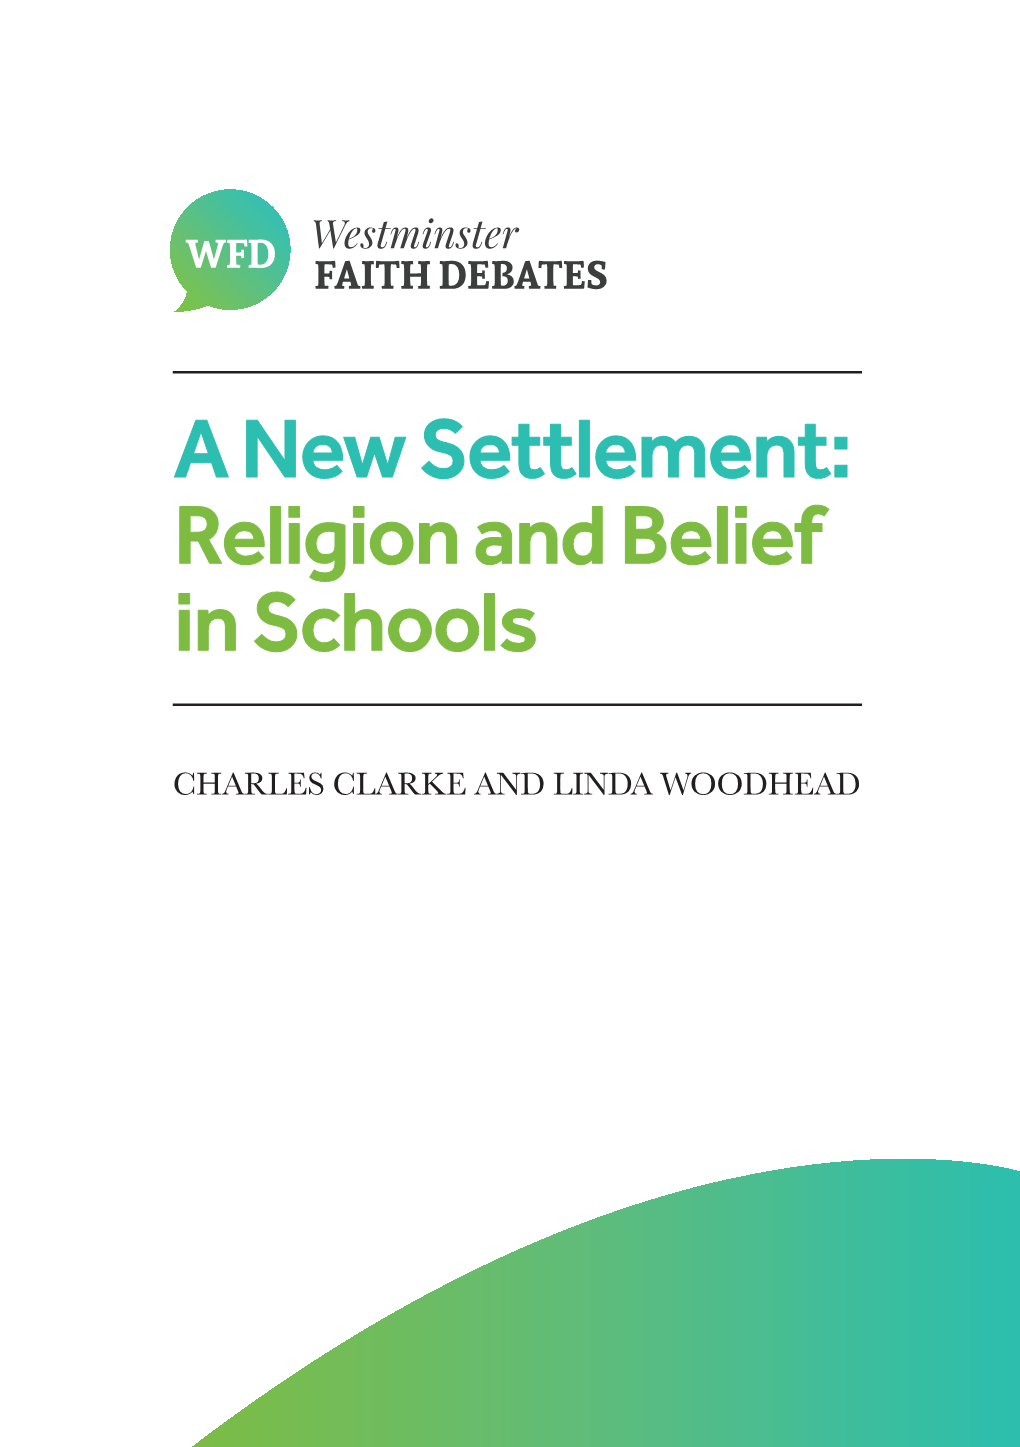 A New Settlement: Religion and Belief in Schools